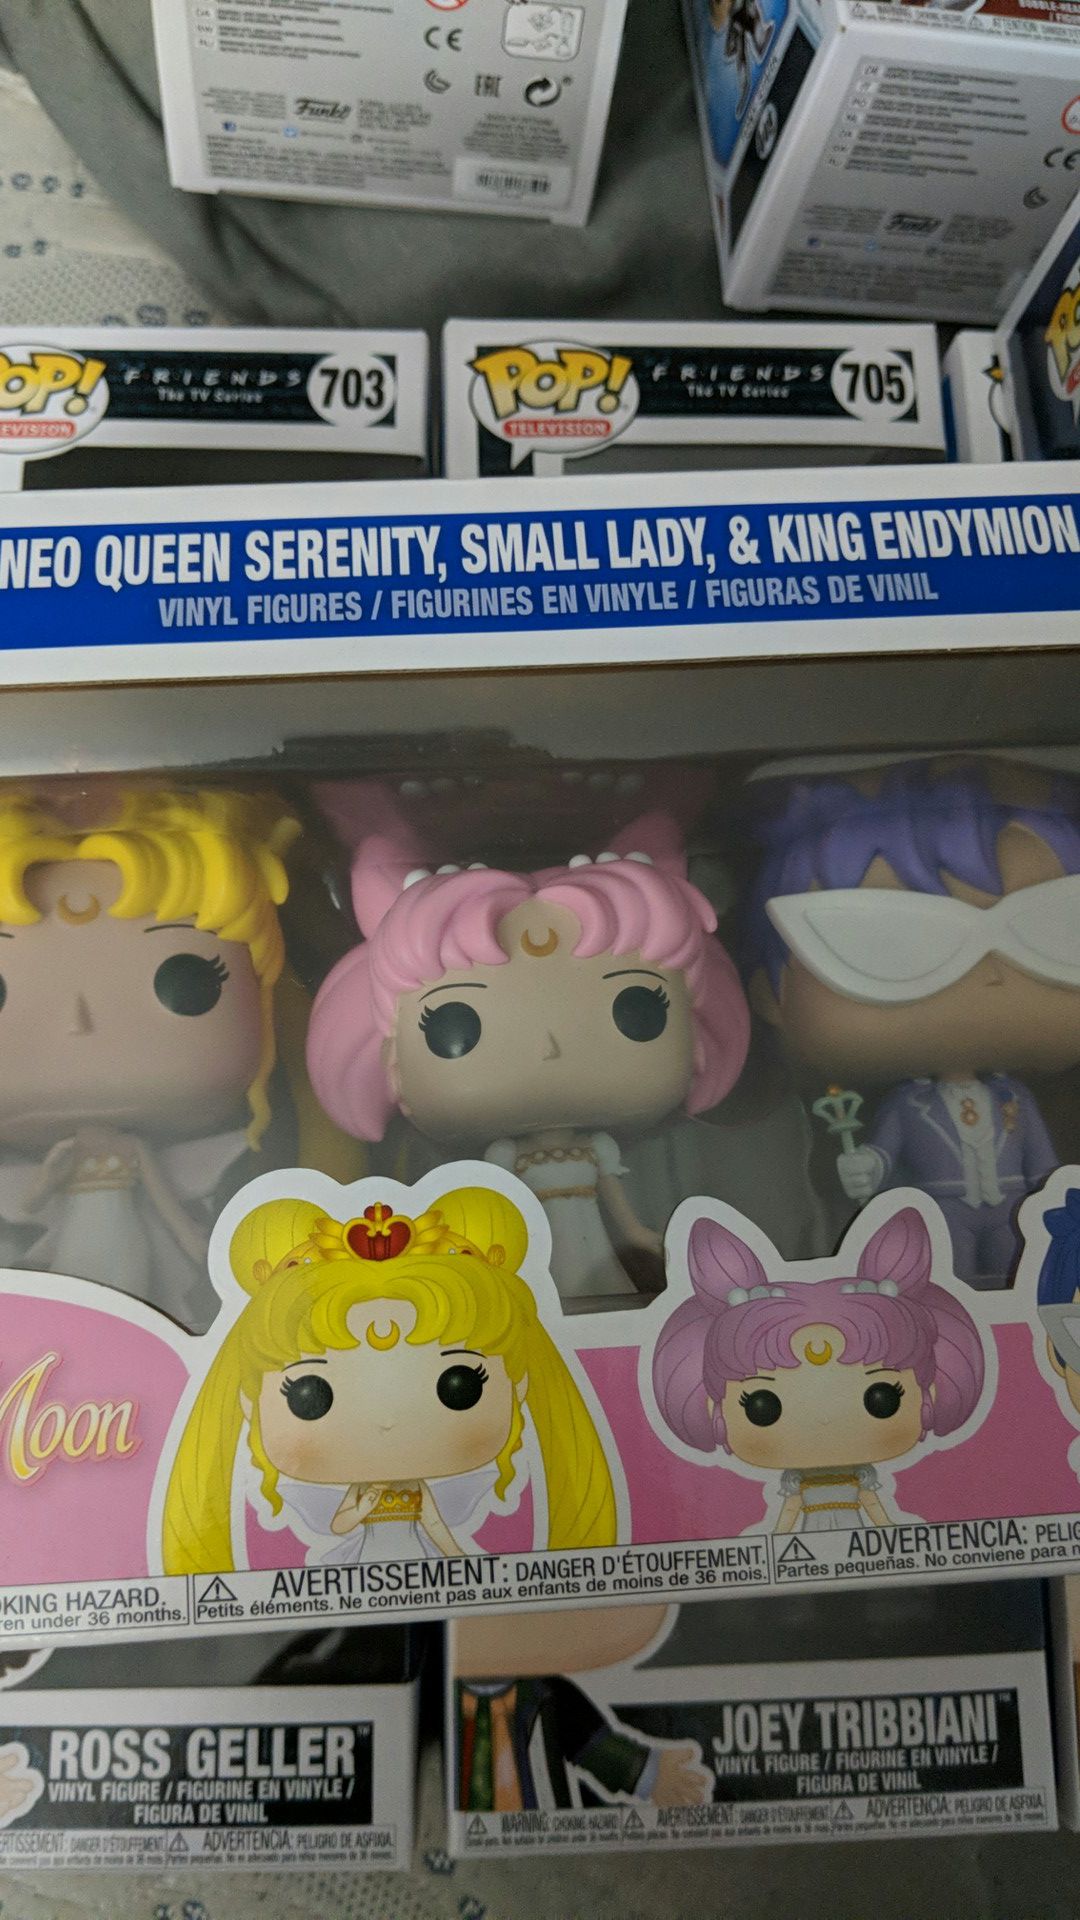 Sailor Moon Serenity, Small Lady, and Endymion Pops